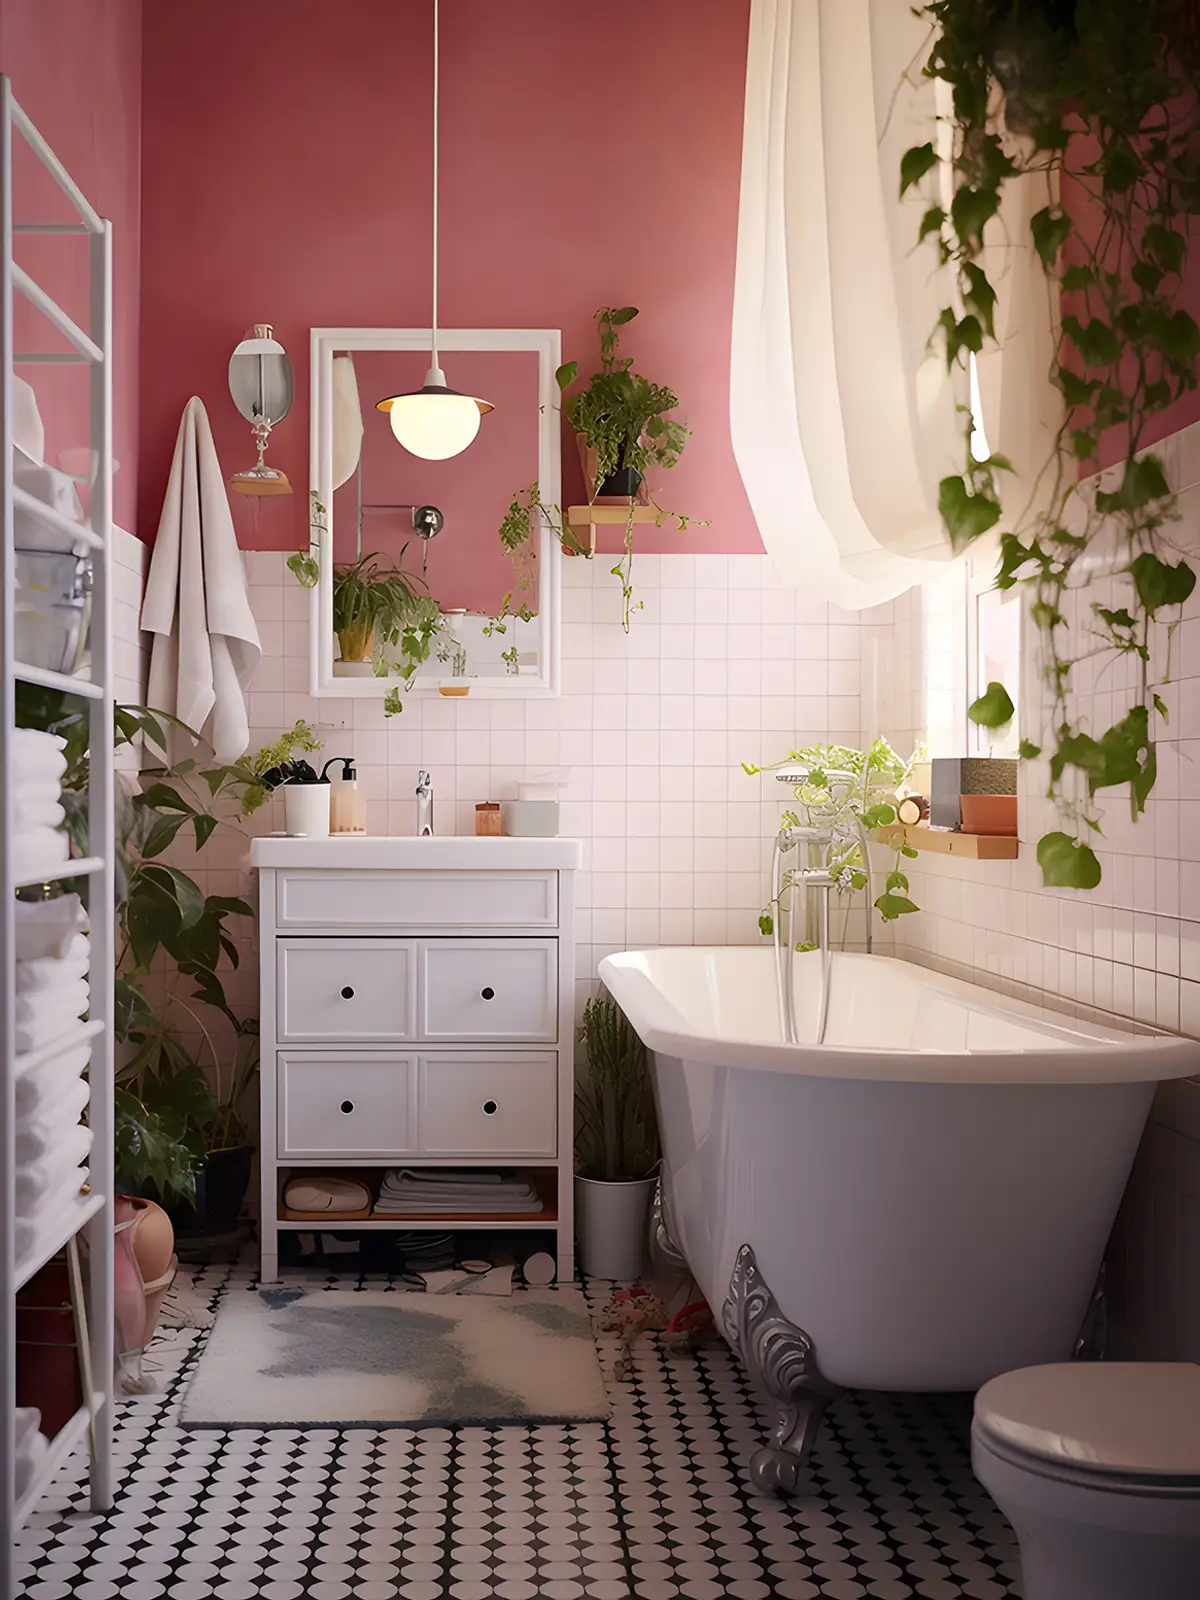 A bathroom with pink walls and plants.